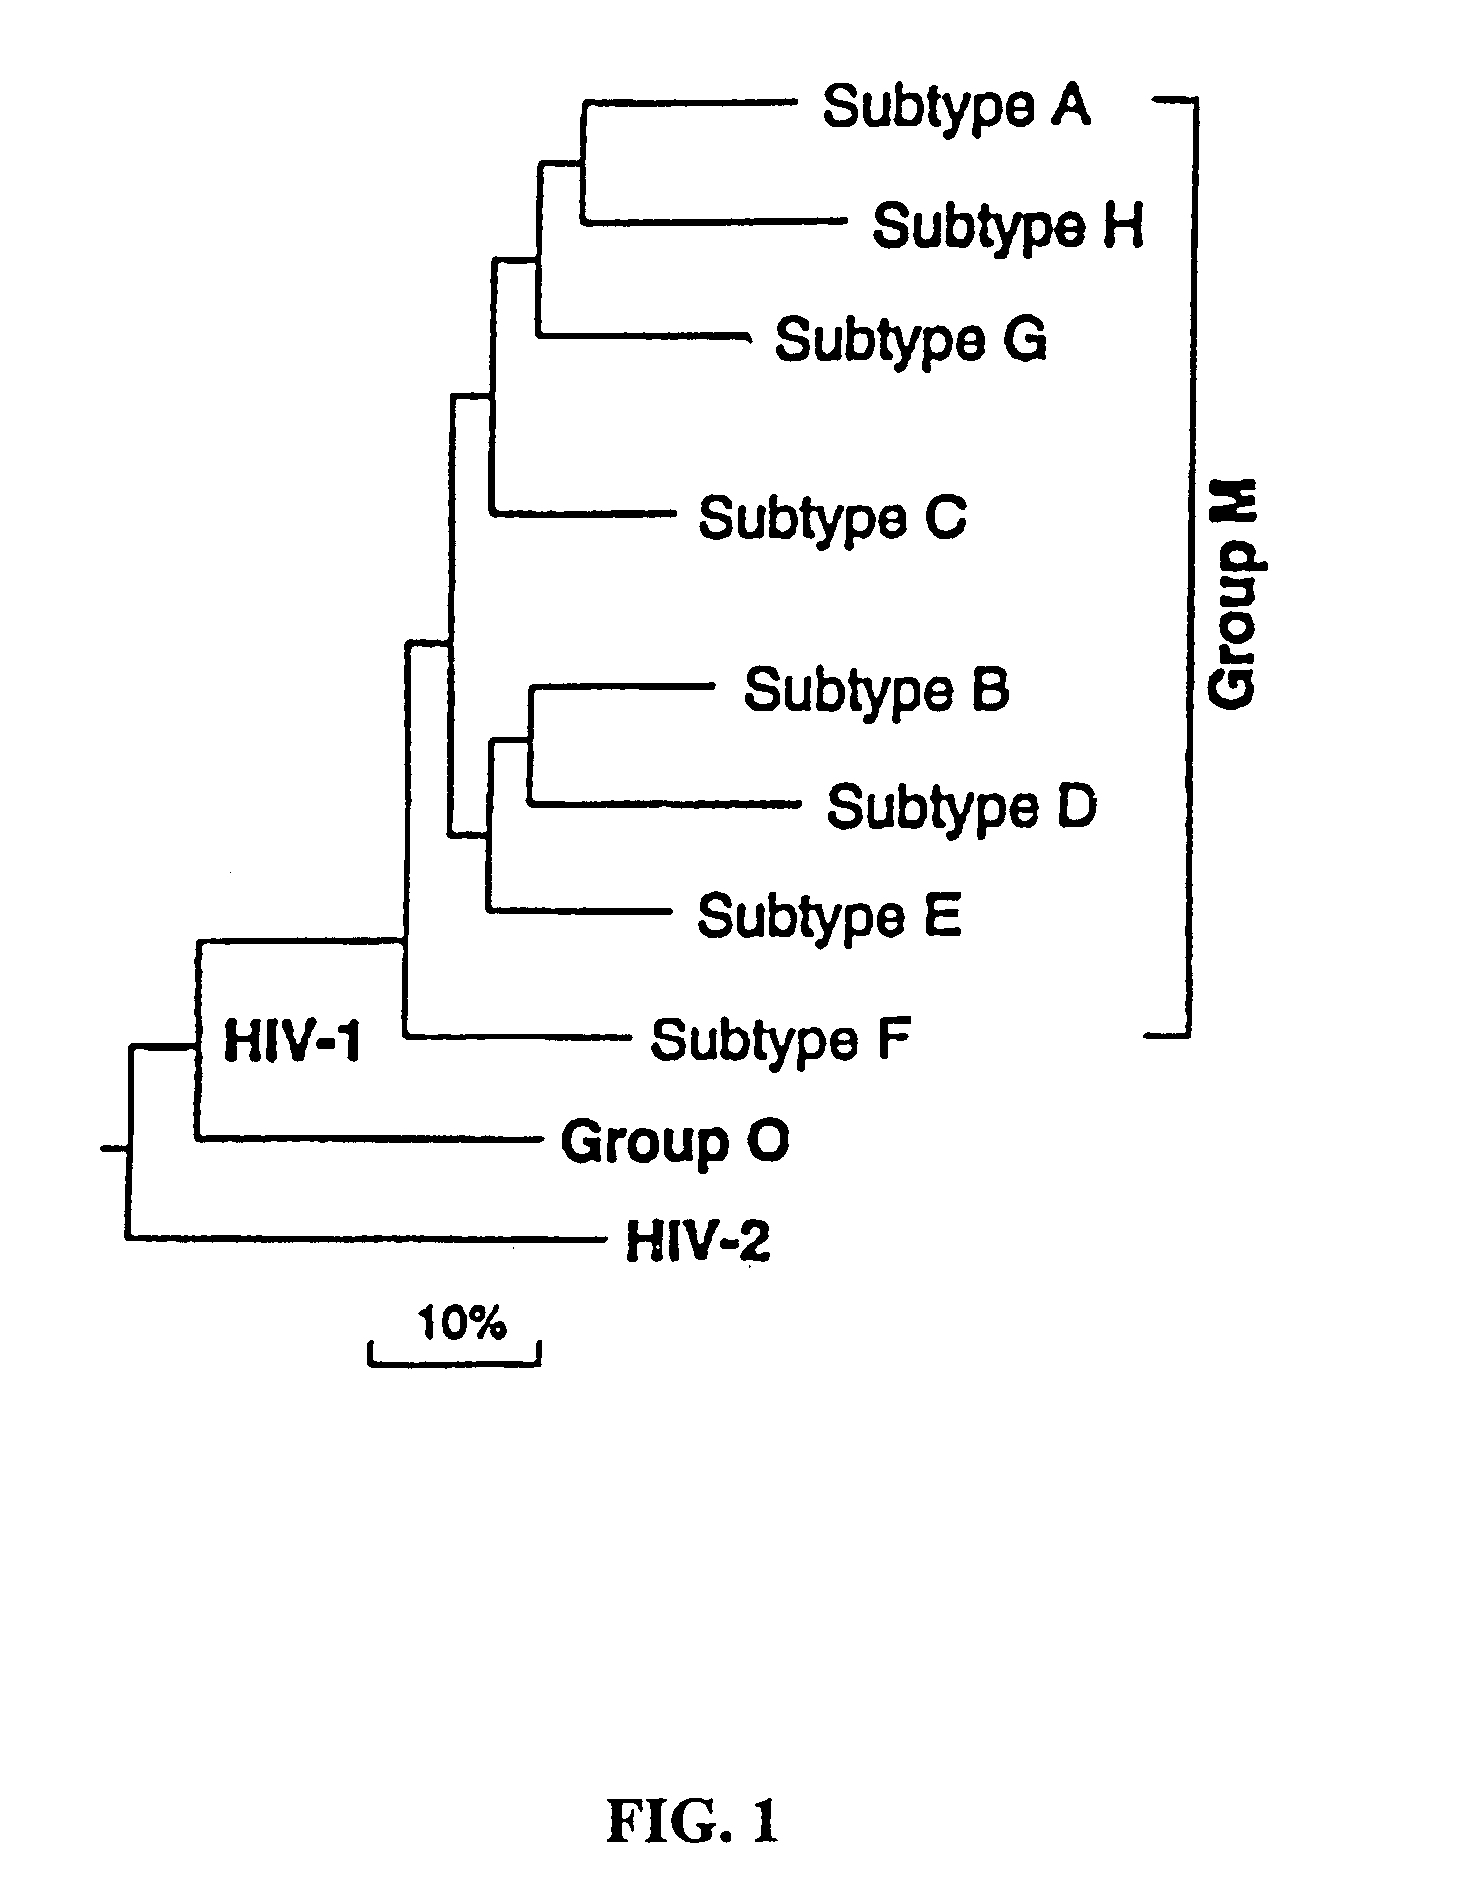 Method for the development of an HIV vaccine